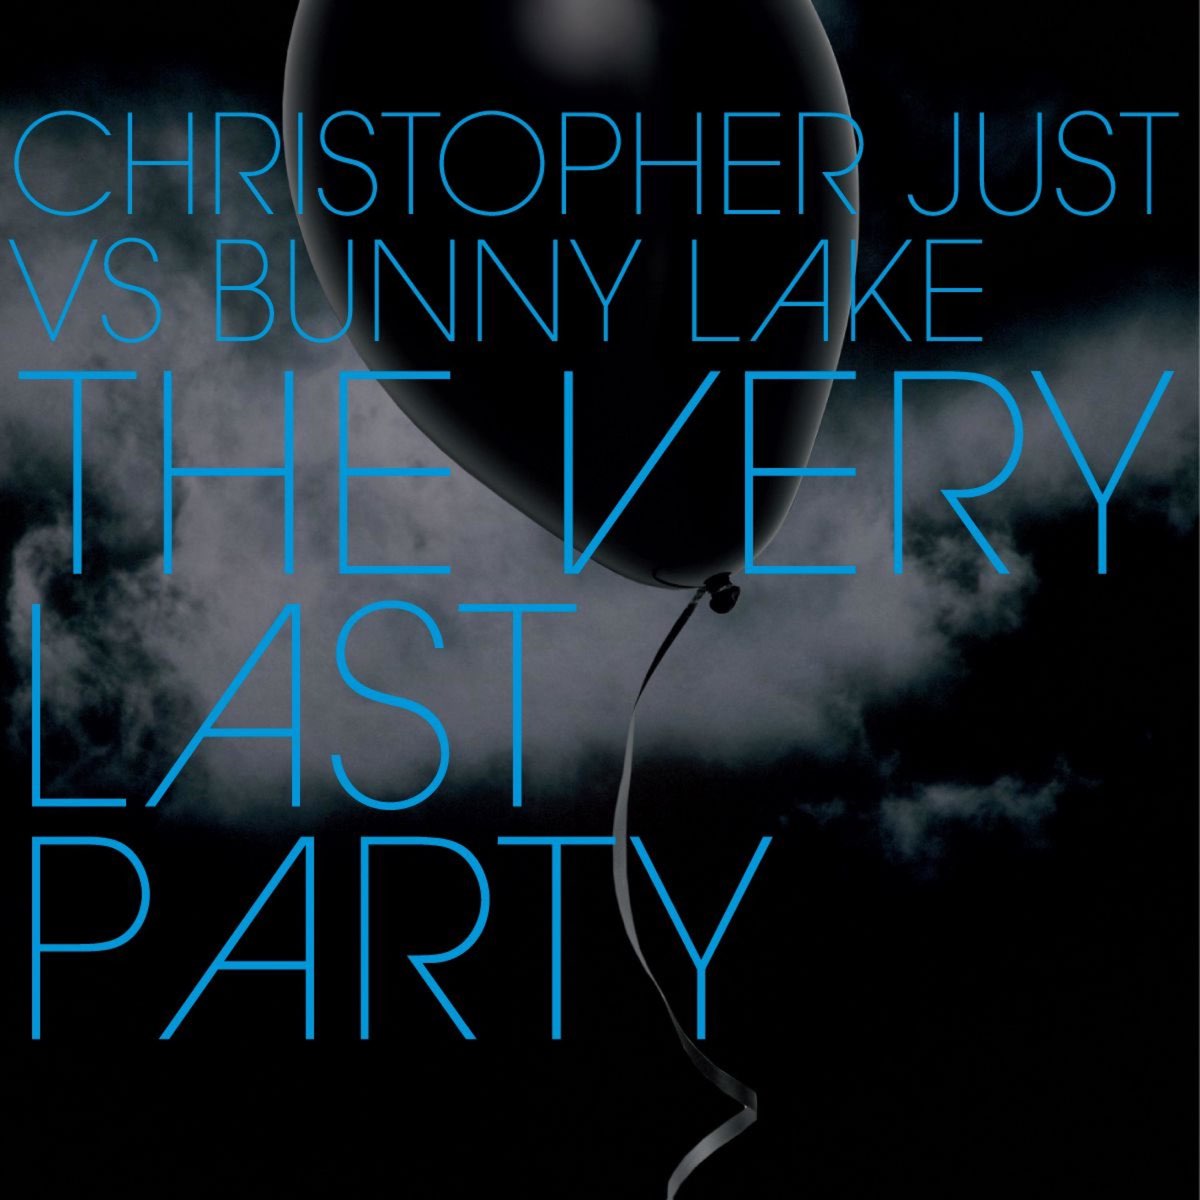 Bunny lake. Make the Party last альбом.